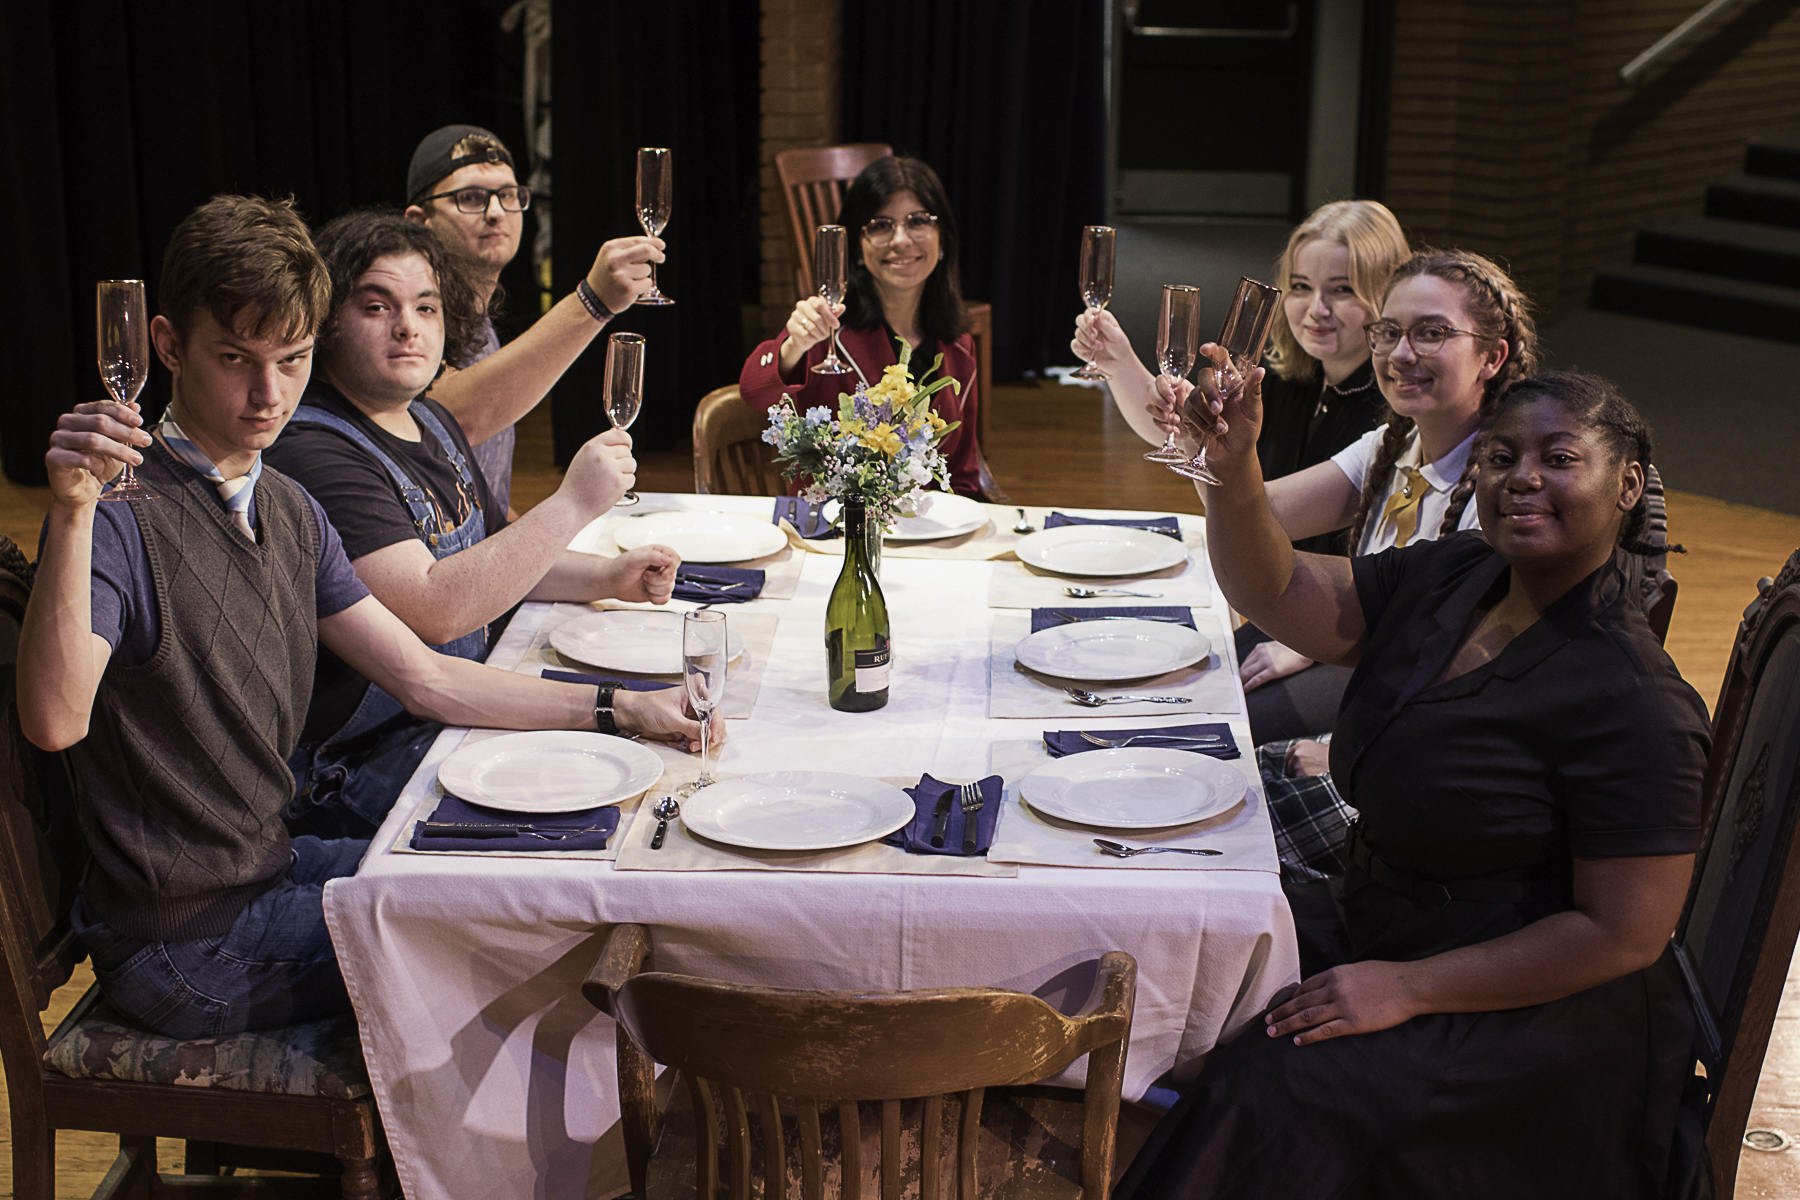 THE DINING ROOM - WCJC Drama Department play addresses passage of time, social issues